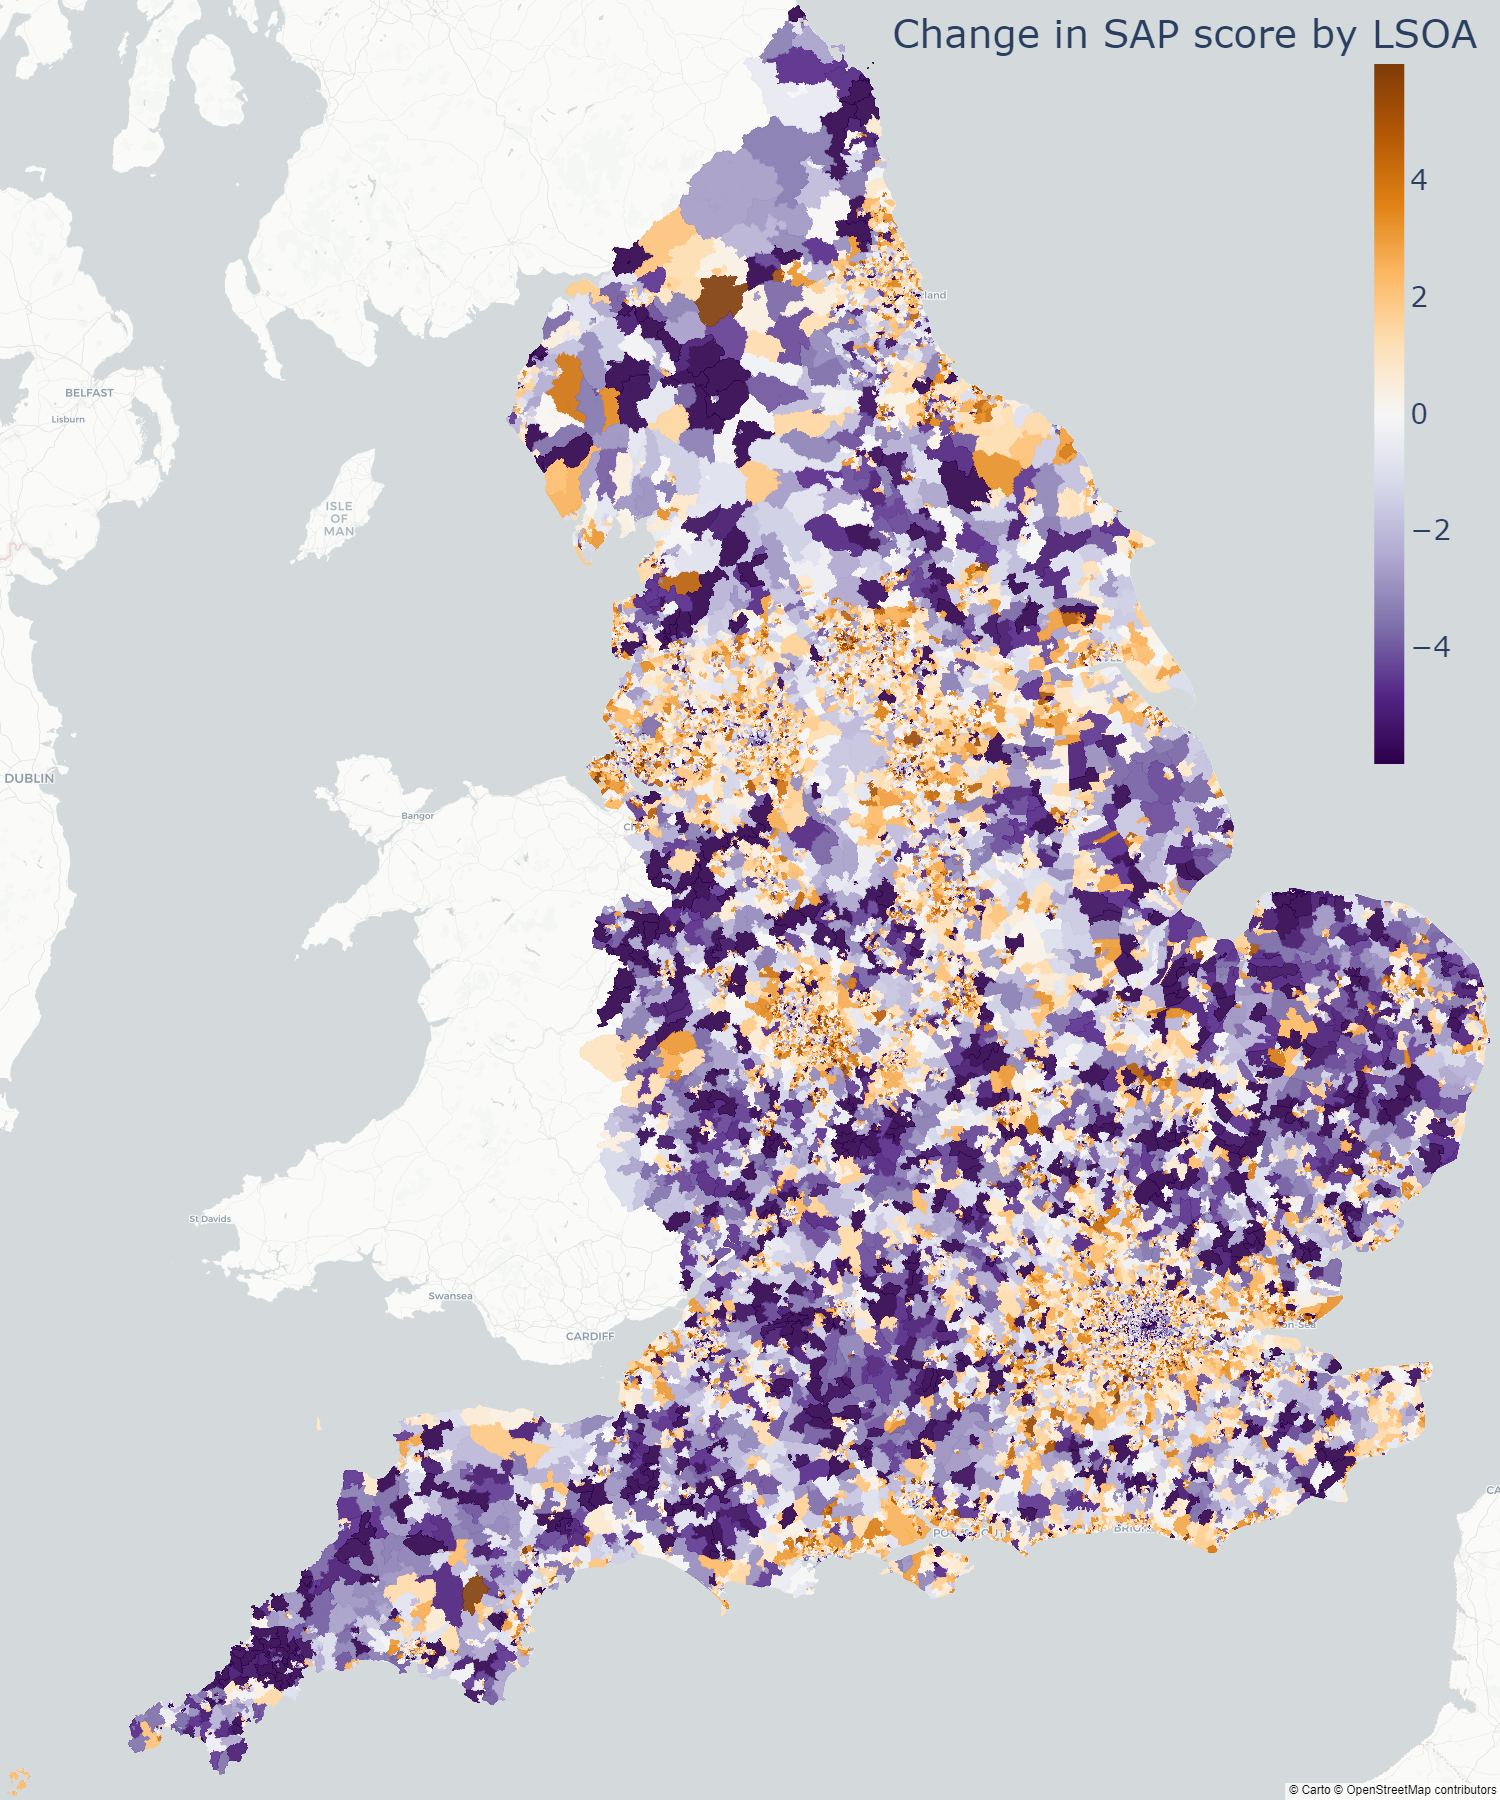 Choropleth showing change in median Standard Assessment Procedure score for Lower Layer Super Output Areas in England when the predicted scores of properties without Energy Performance Certificates are included.